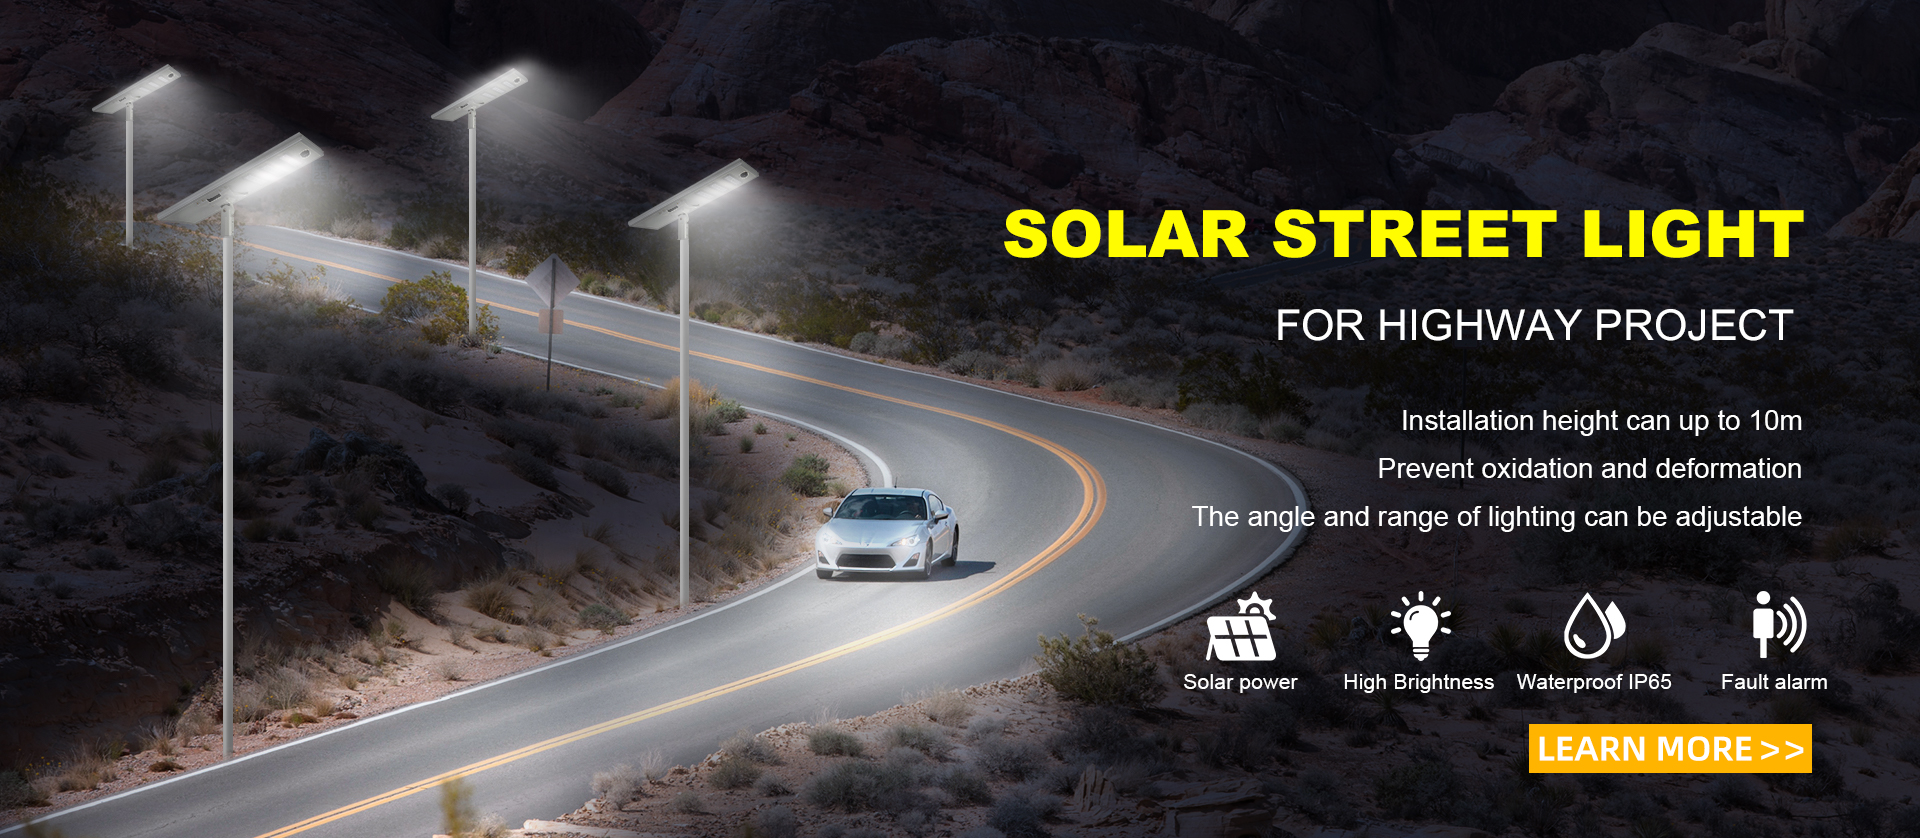 All in One Solar Street Light for Highway Project